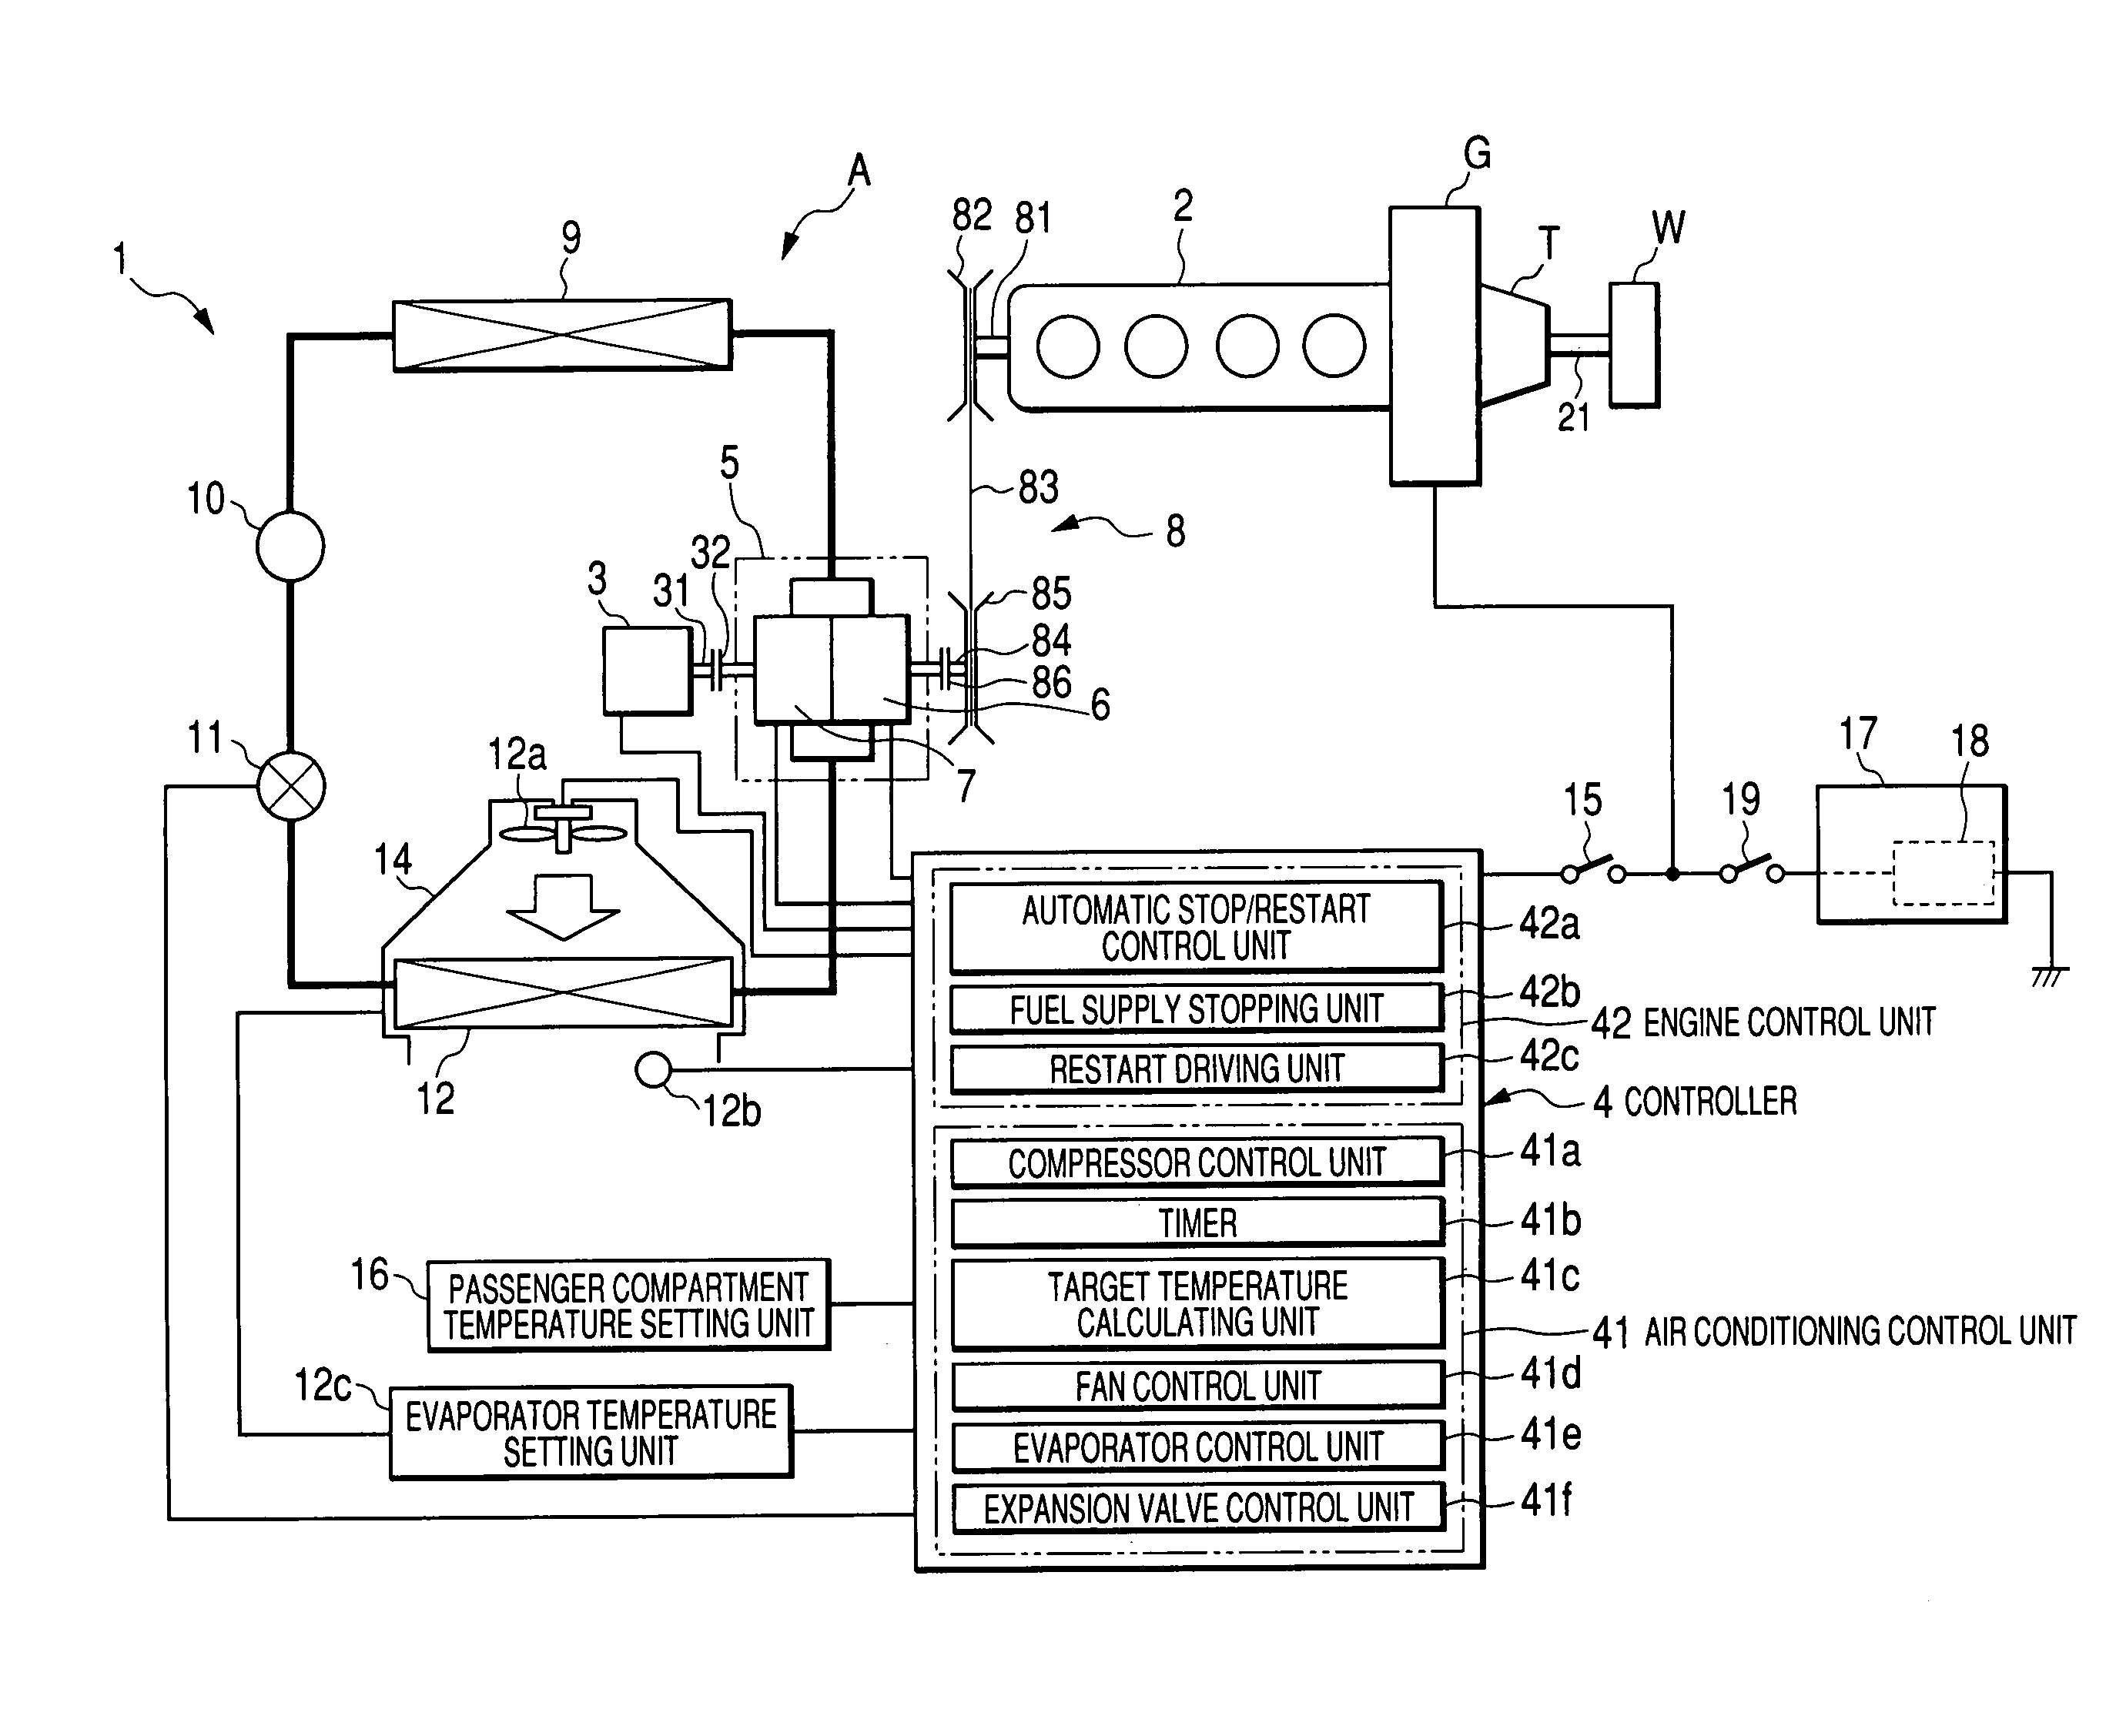 Air conditioning system for vehicle